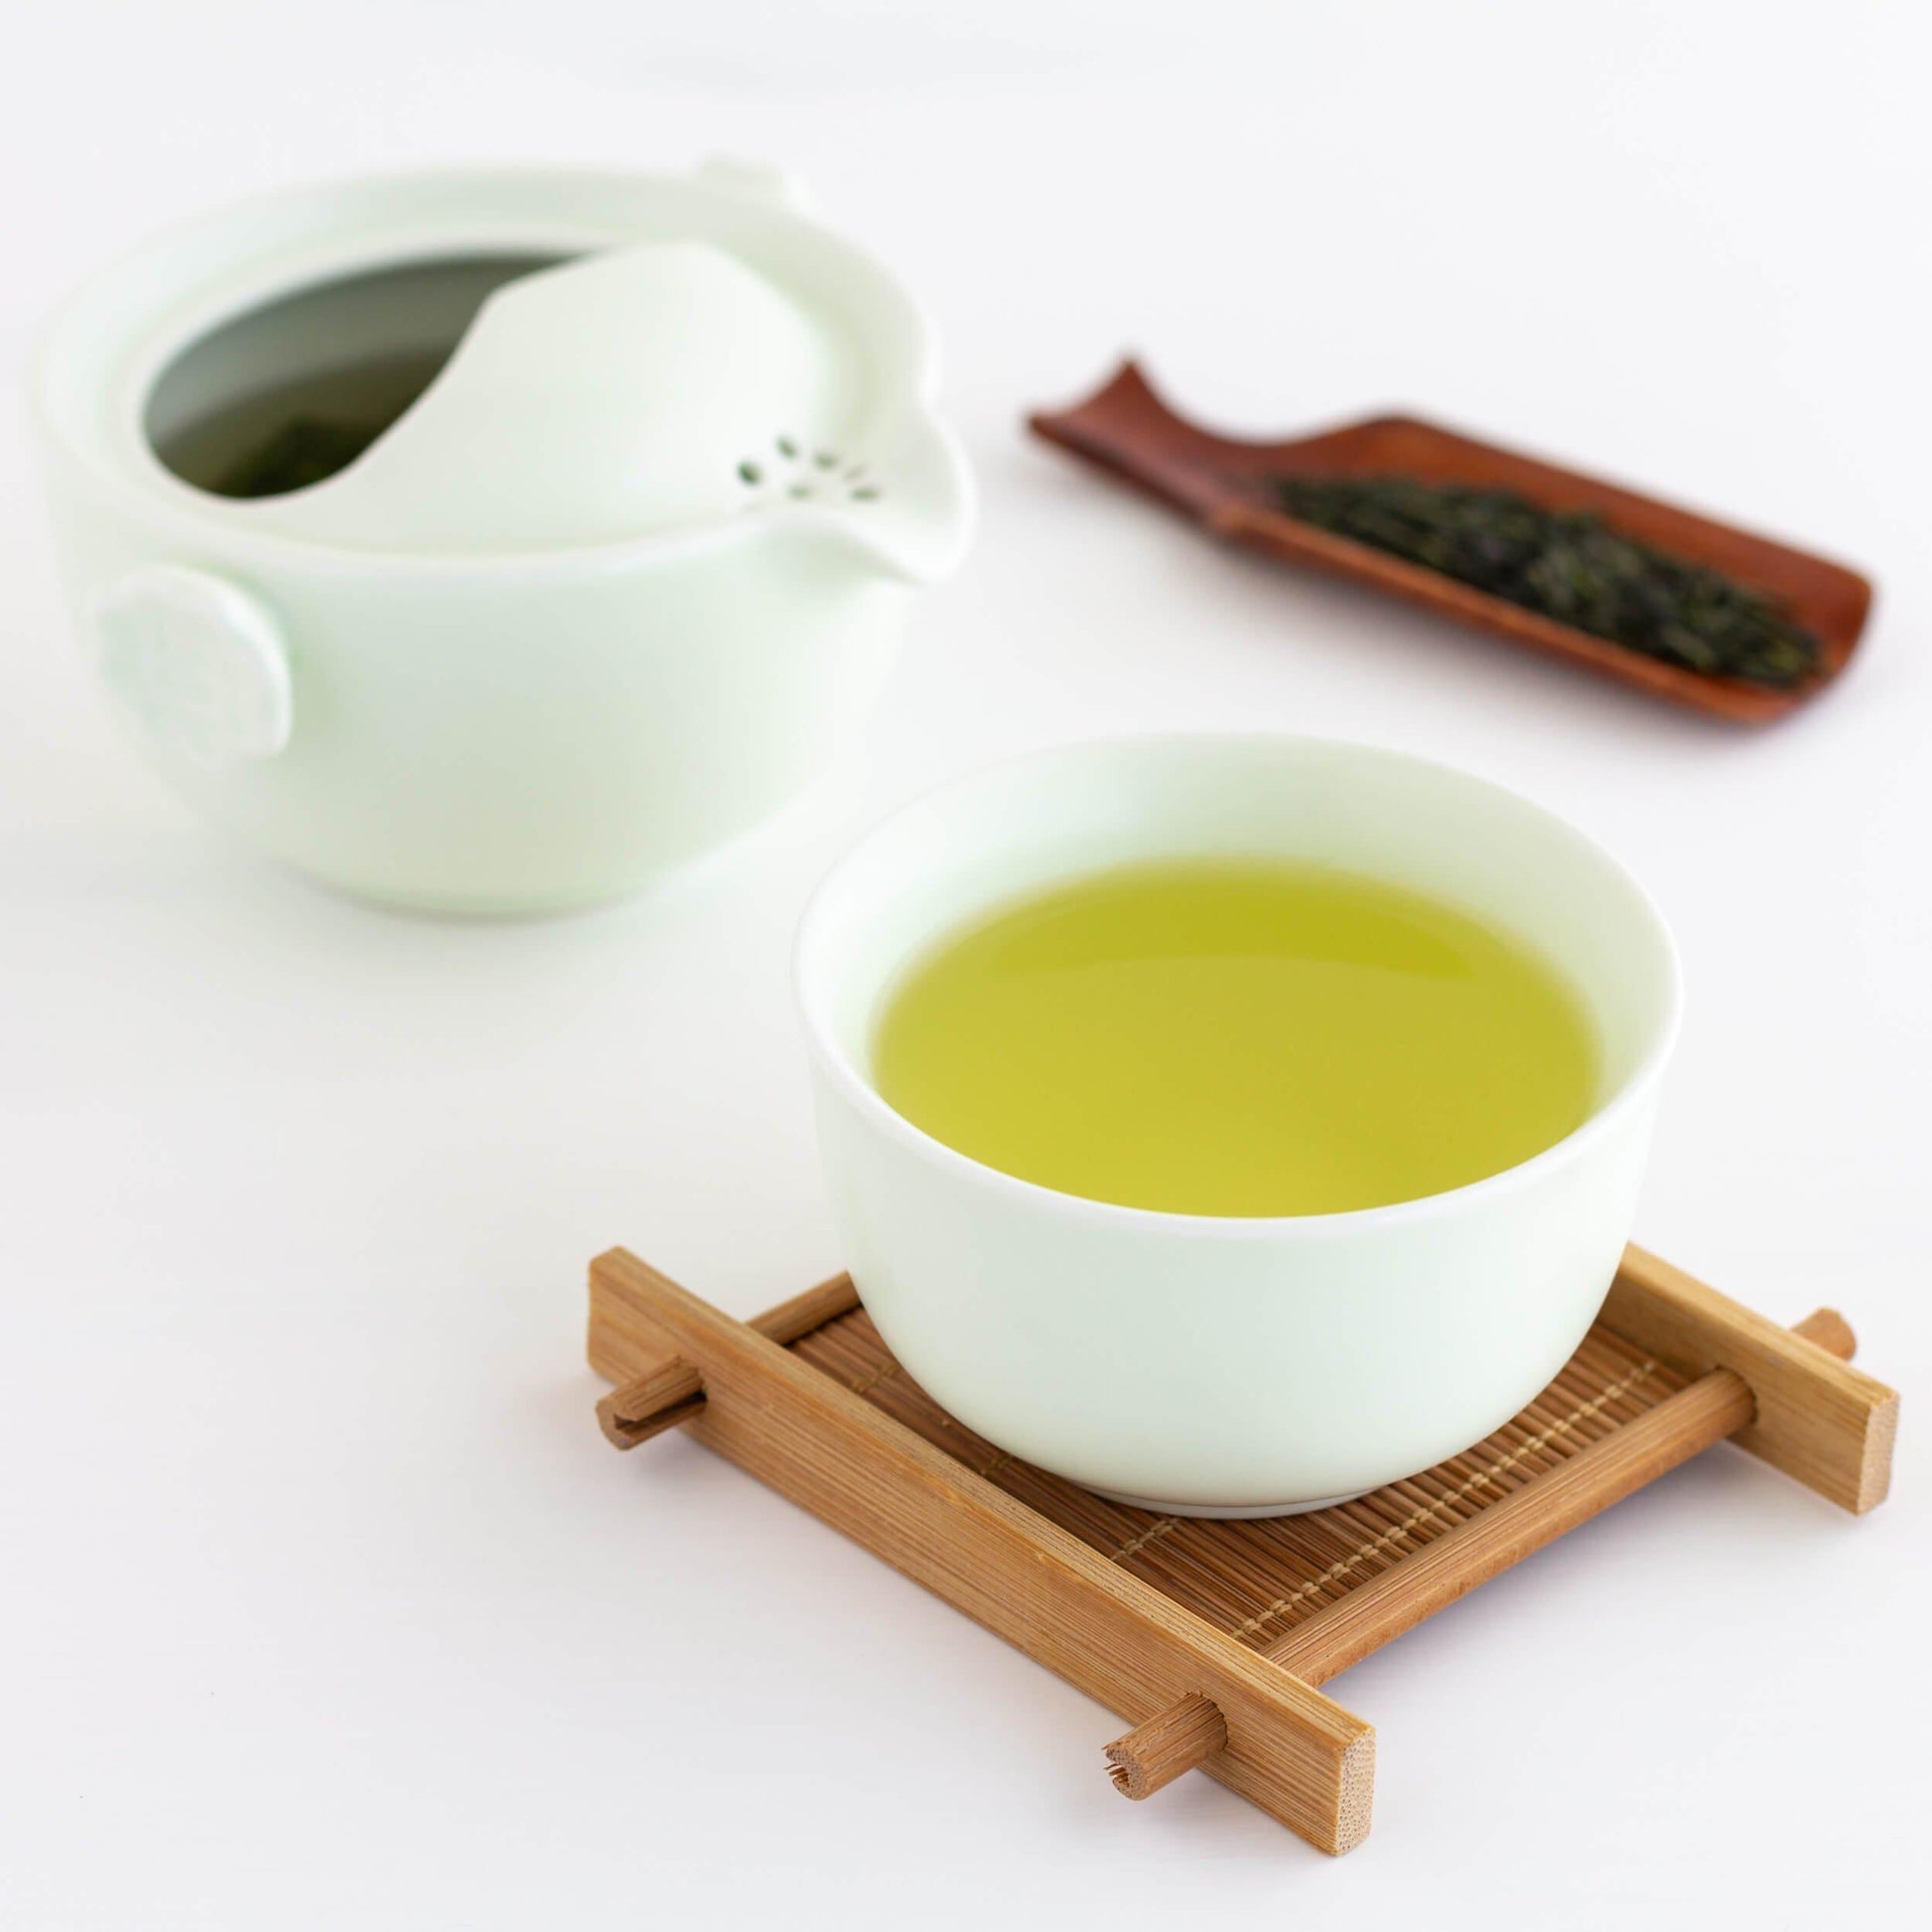 Kabusecha Organic Green Tea shown as brewed tea in a celadon teacup on  a bamboo coaster. Tiny celadon teapot and wooden scoop of loose leaf tea in the background